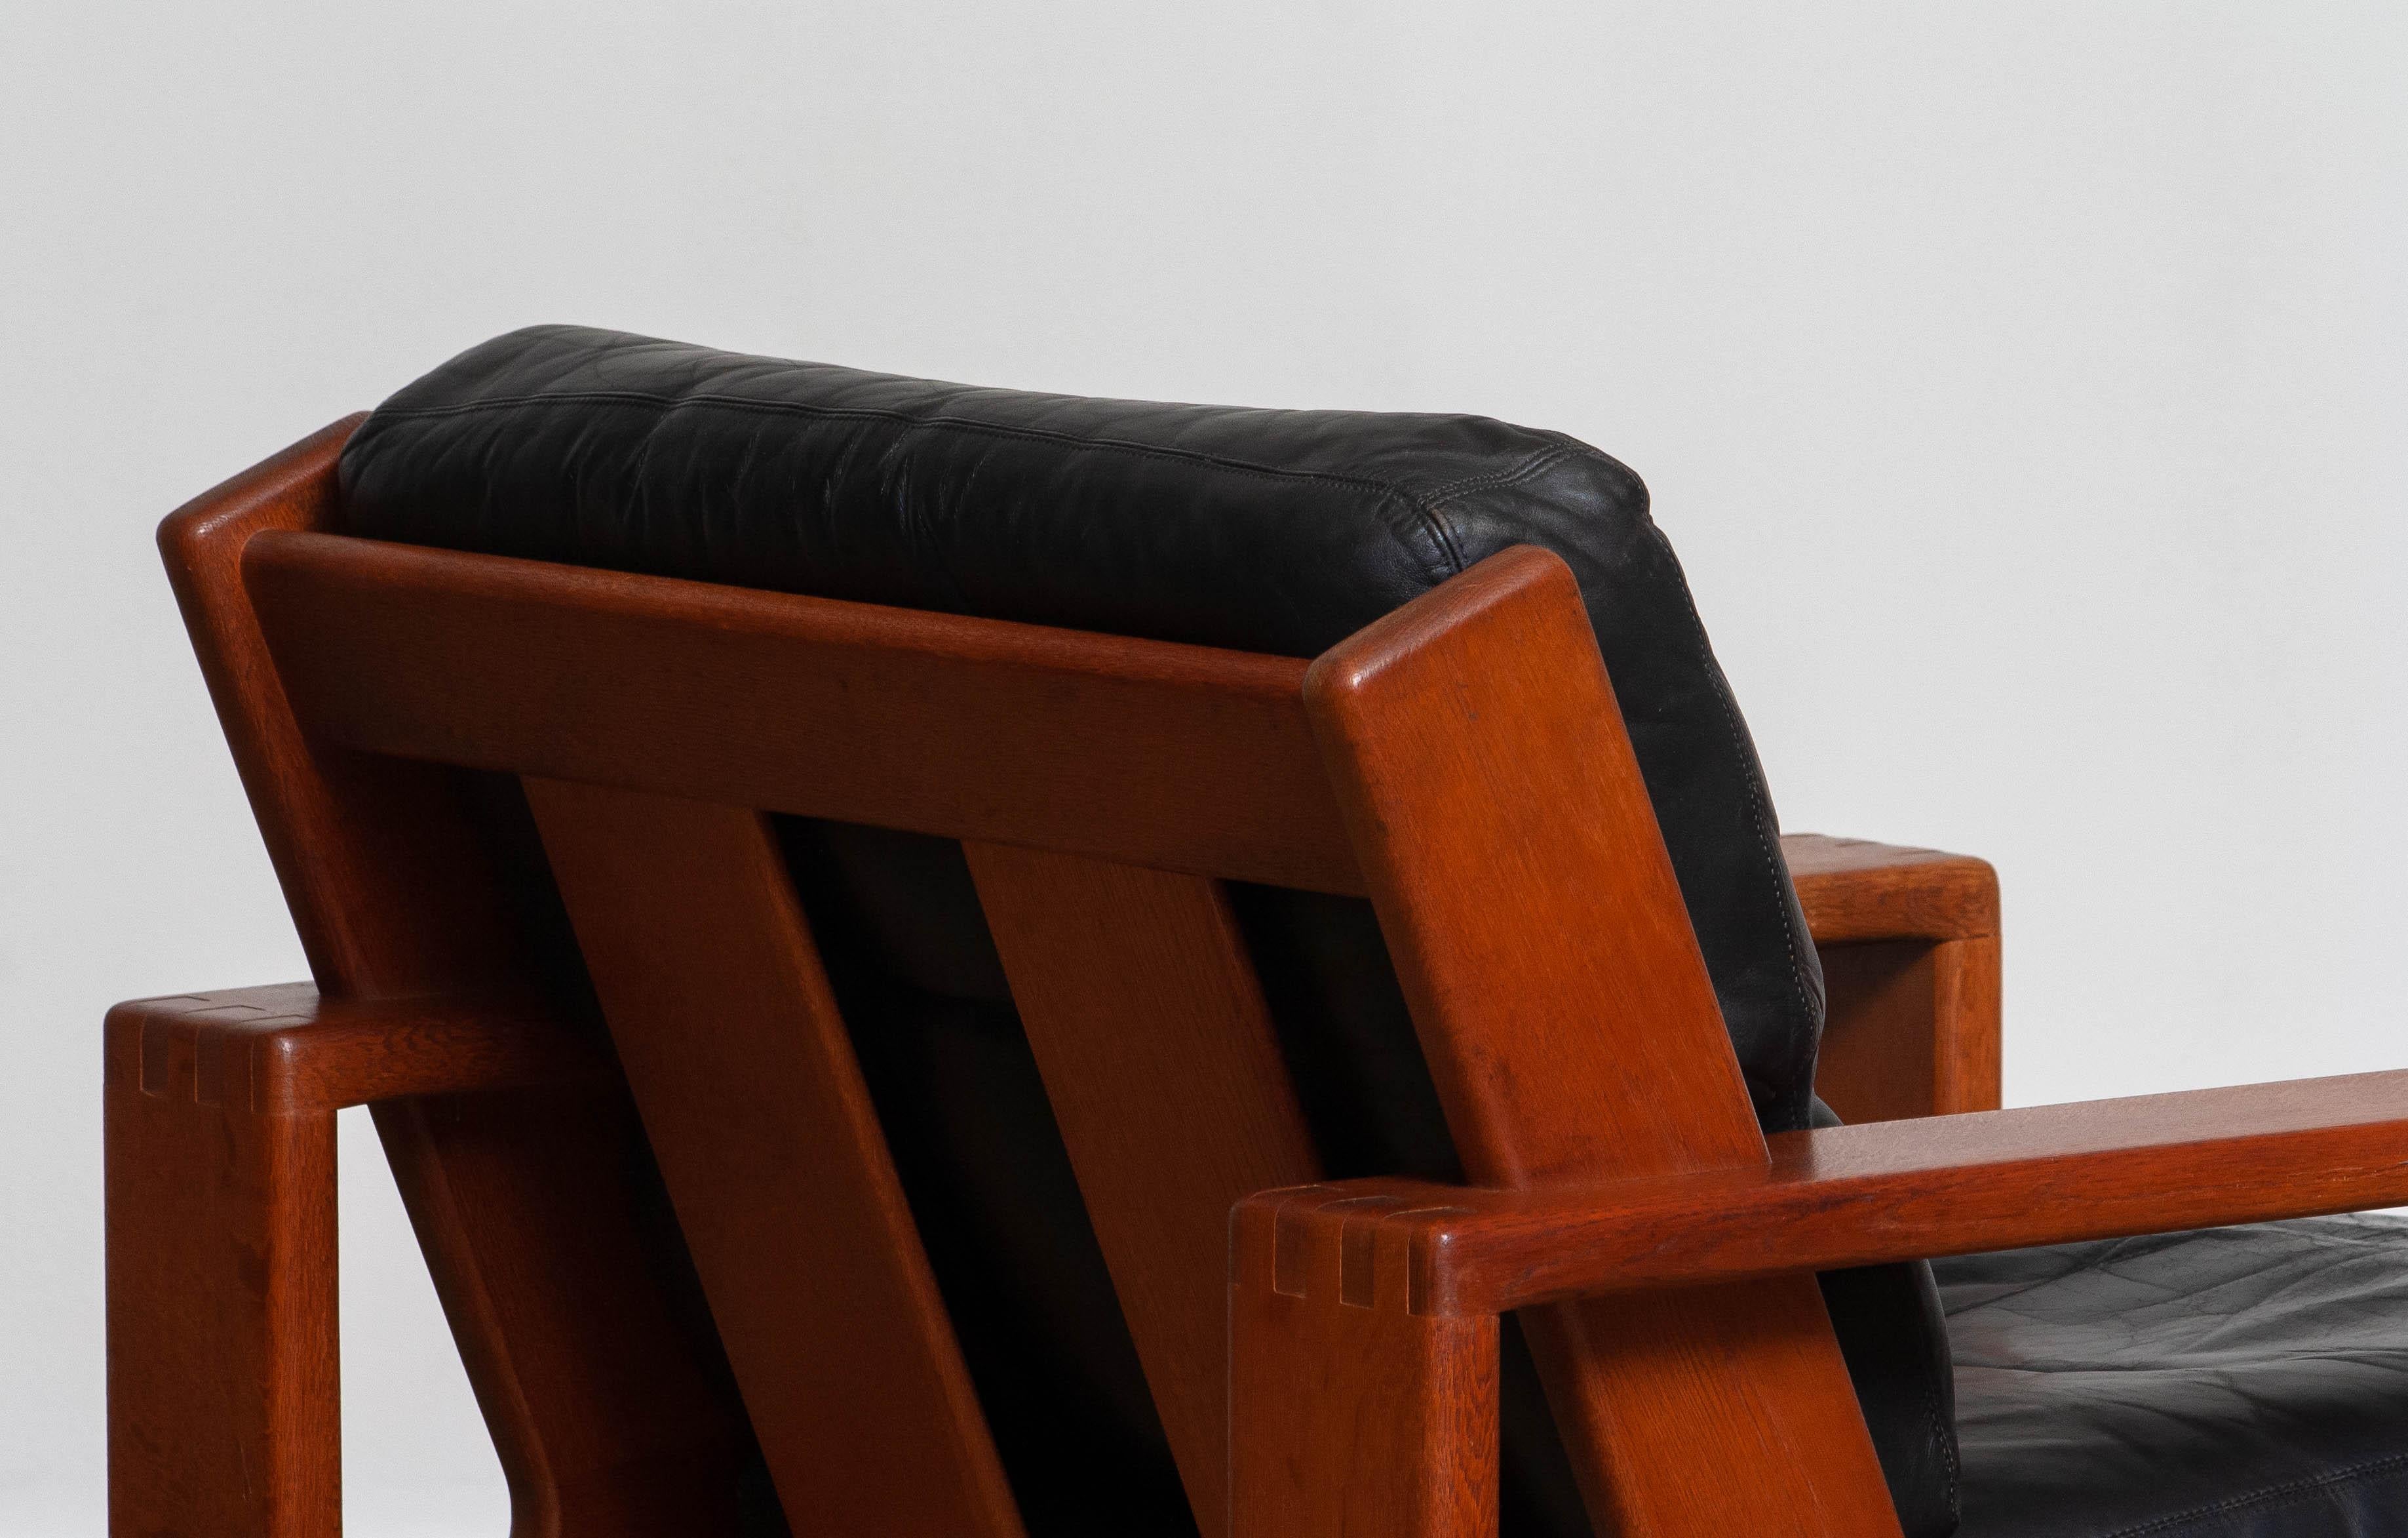 Finnish 1960s, Teak and Black Leather Cubist Lounge Chair by Esko Pajamies for Asko